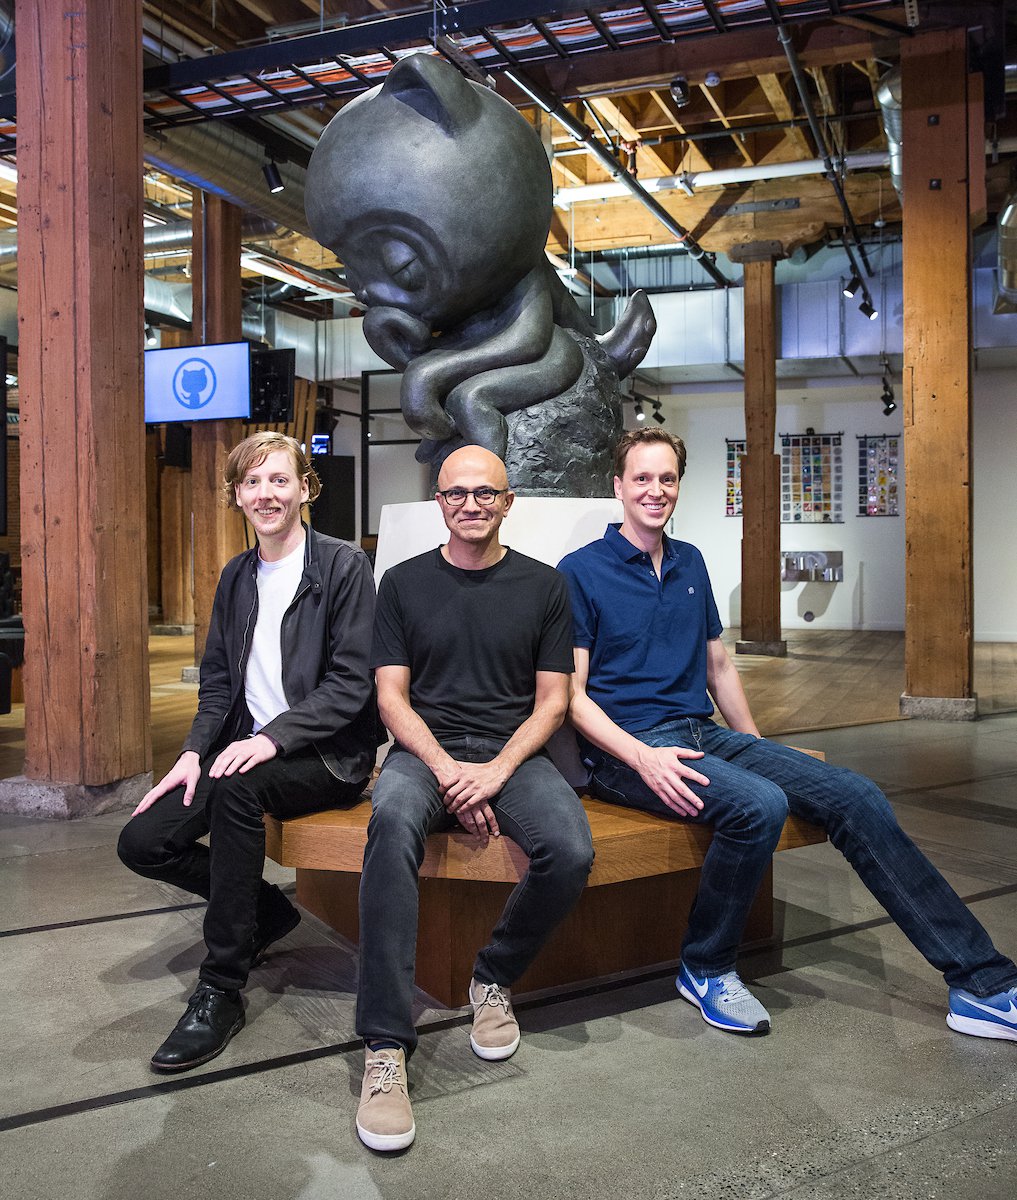 Microsoft Officially Announces GitHub Acquisition for $7.5 Billion